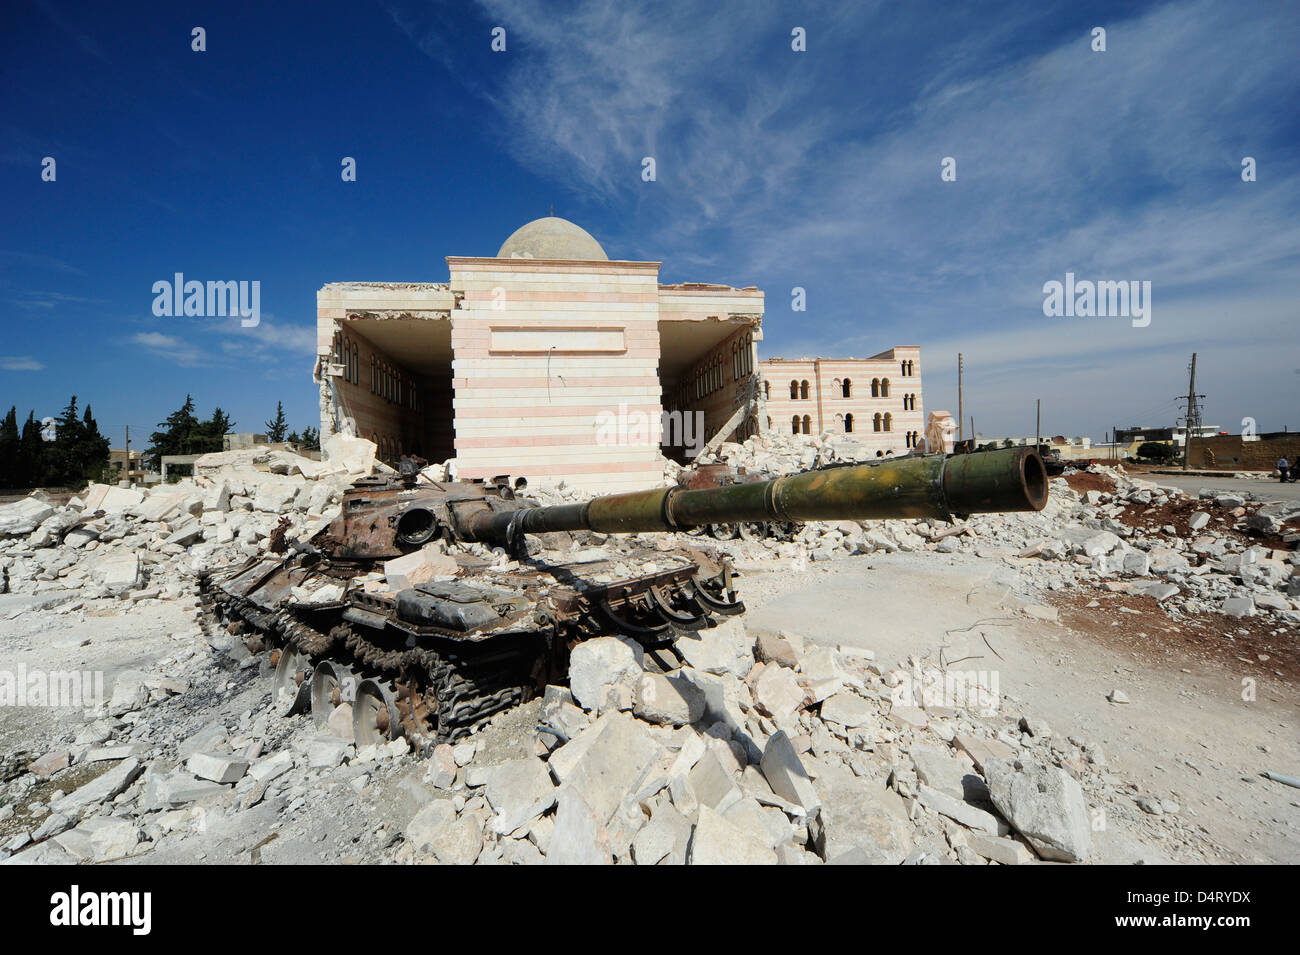 A Russian T-72 main battle tank destroyed in Azaz, Syria. Stock Photo